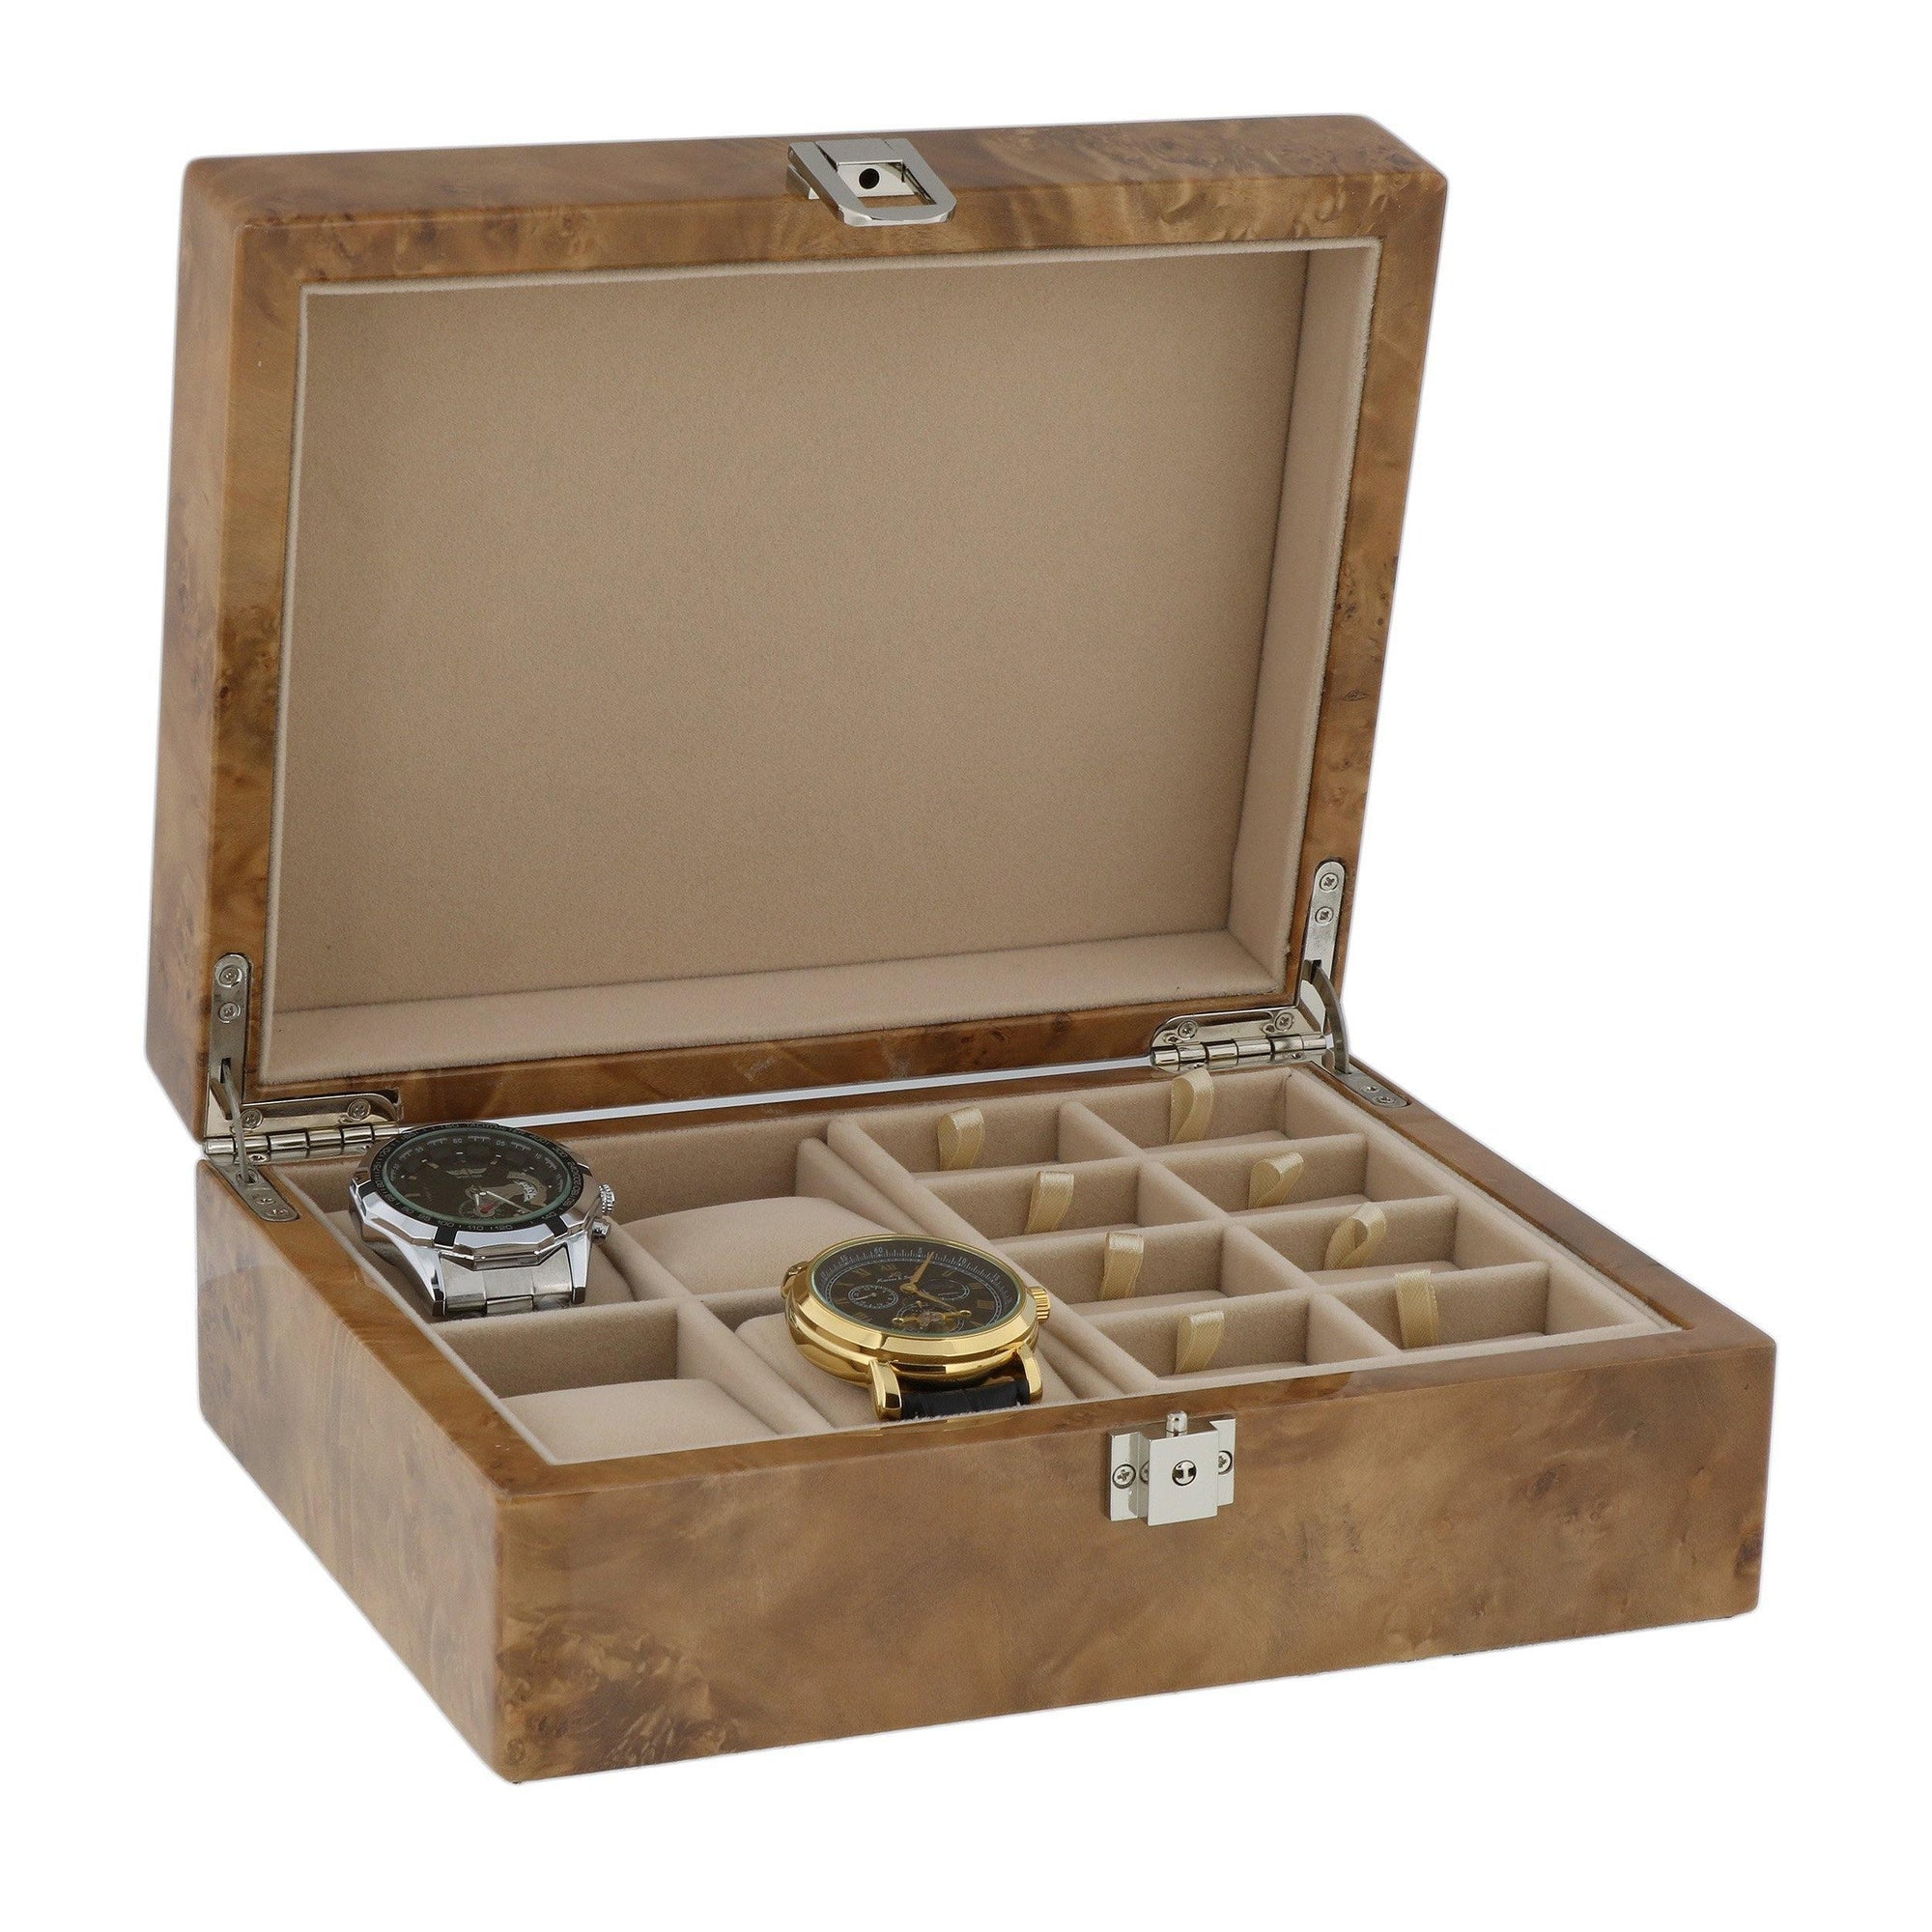 Light Burl Wood Watch and Cufflink Collectors Box 16 Pair Cufflinks + 4 Wrist Watches with Solid Lid by Aevitas